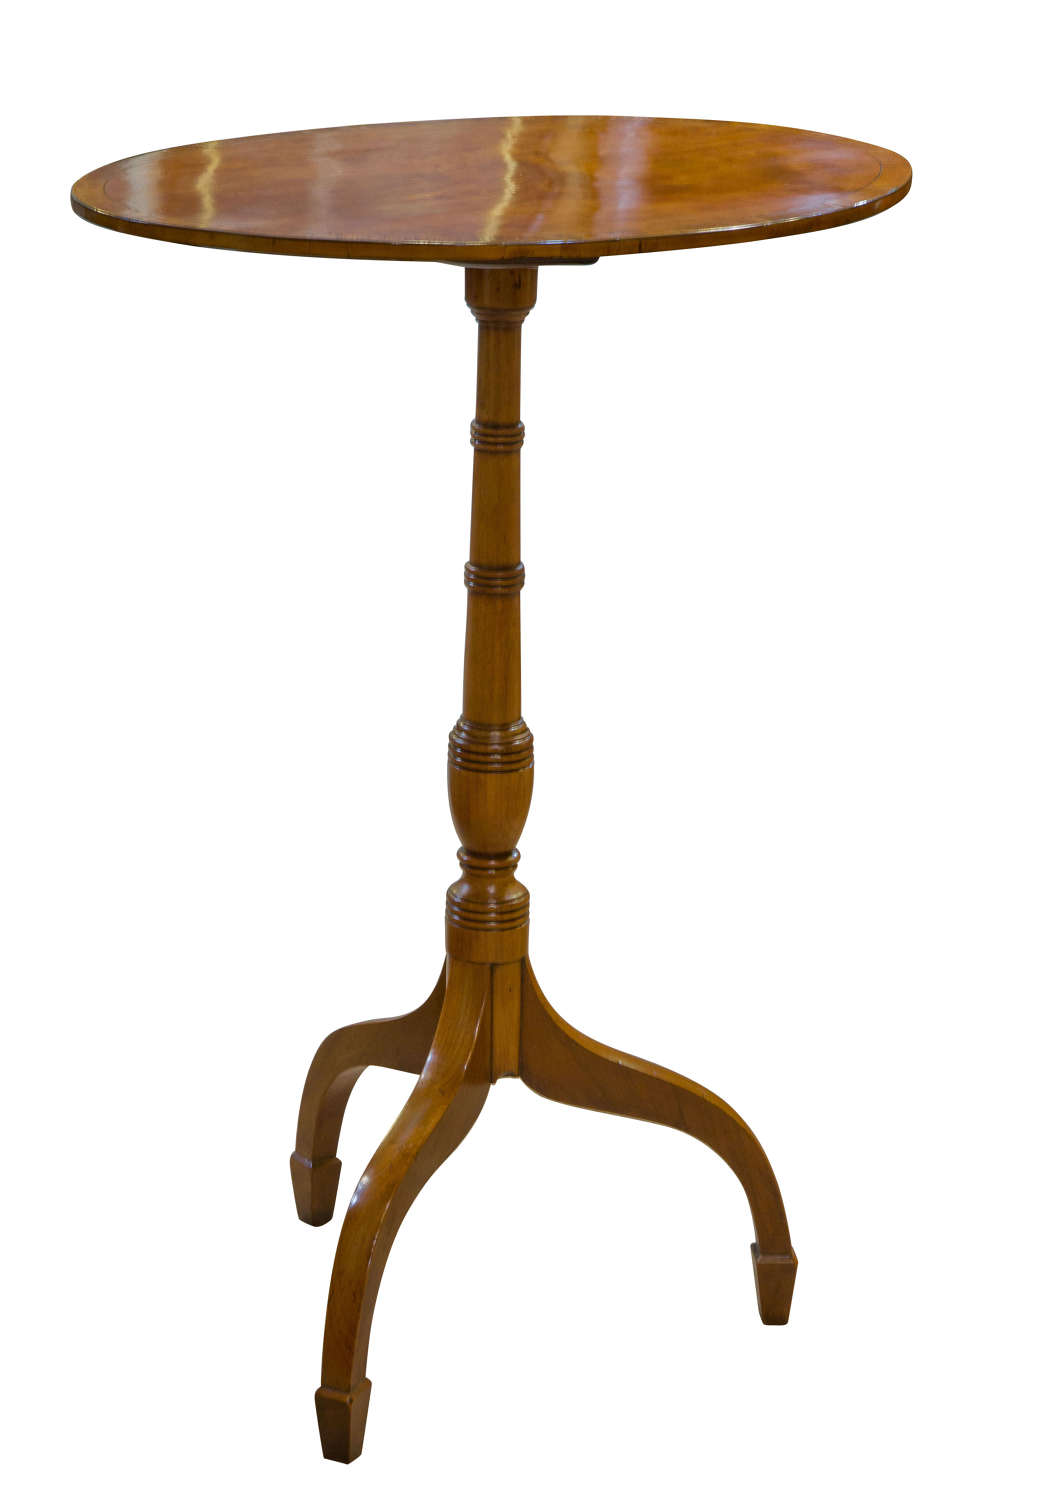 19thc oval wine table